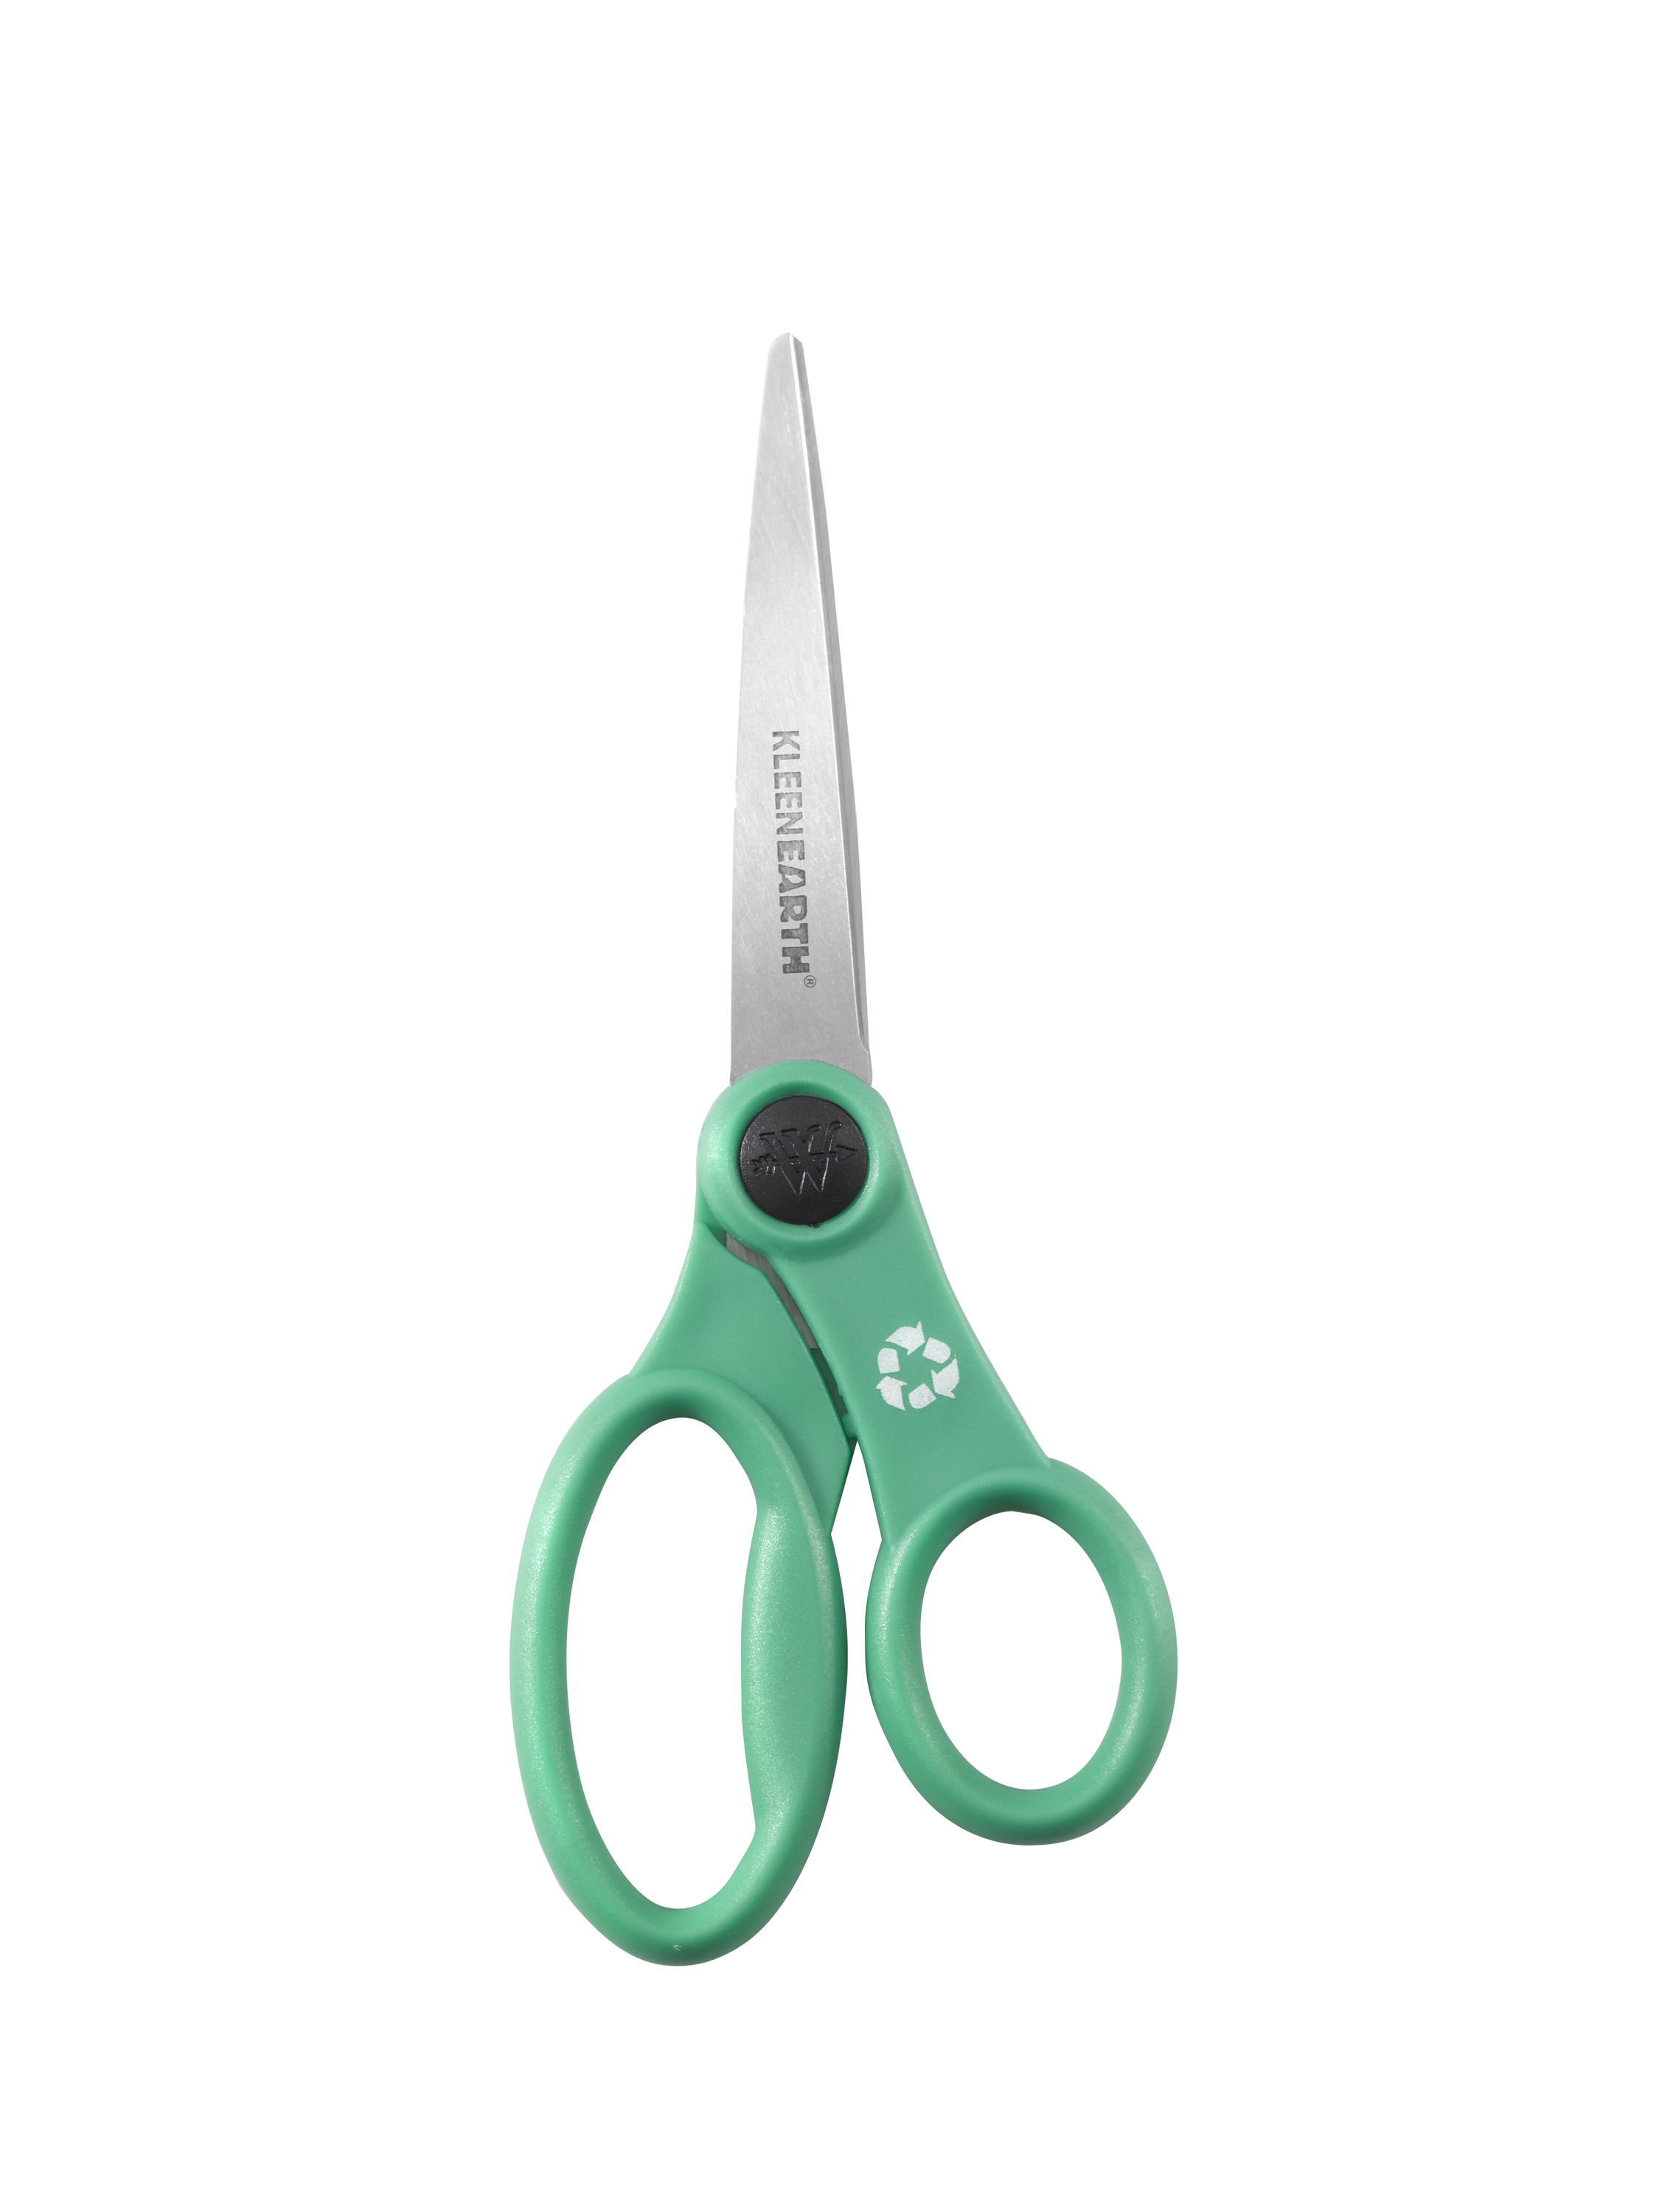 Westcott KleenEarth 8" Recycled Scissors with Anti-Microbial Protection (14820)